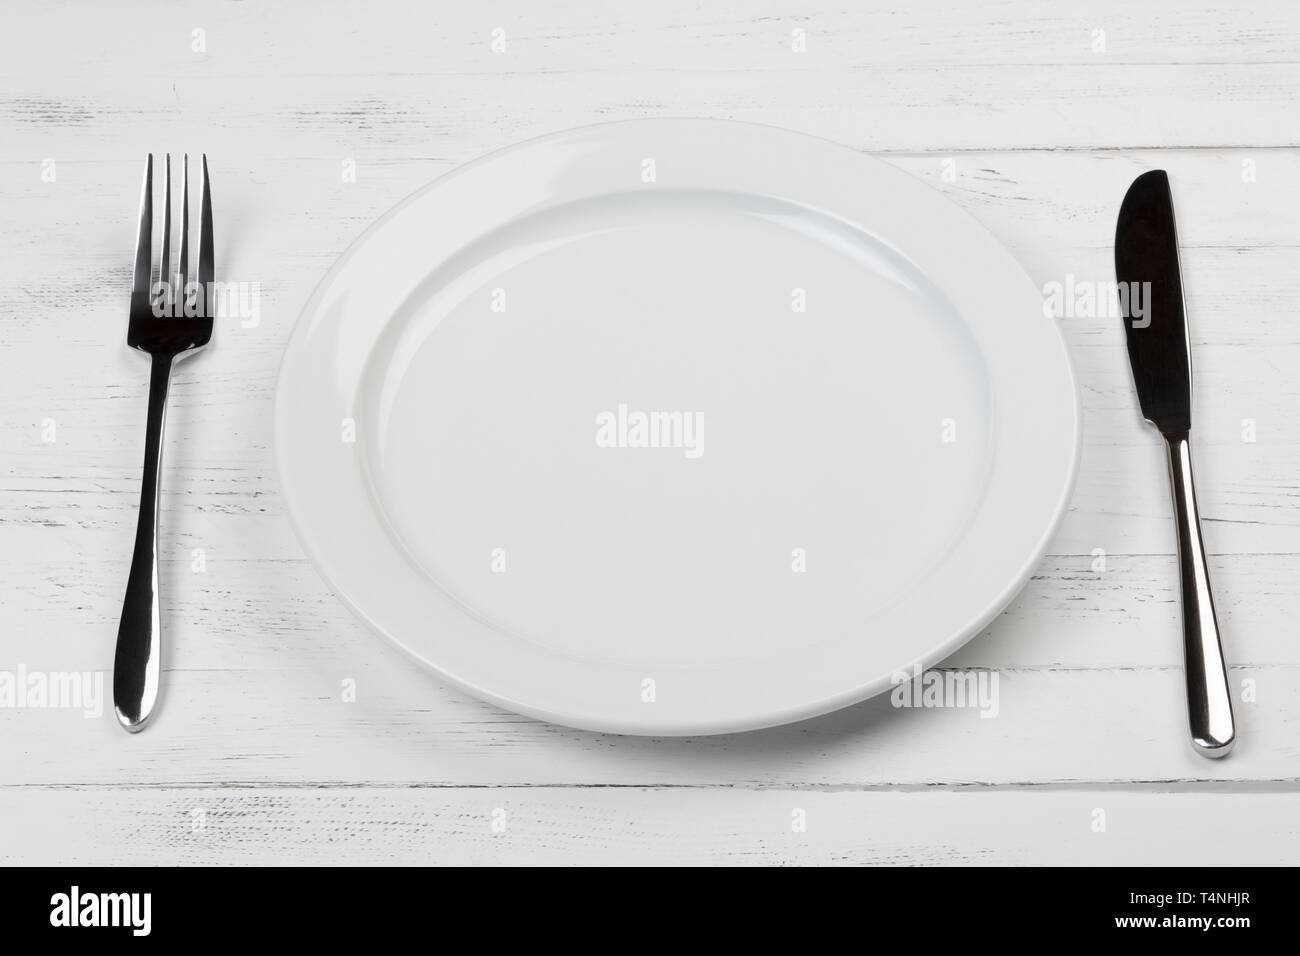 Empty clean plate with fork and knife on wooden table, focus on front part Stock Photo